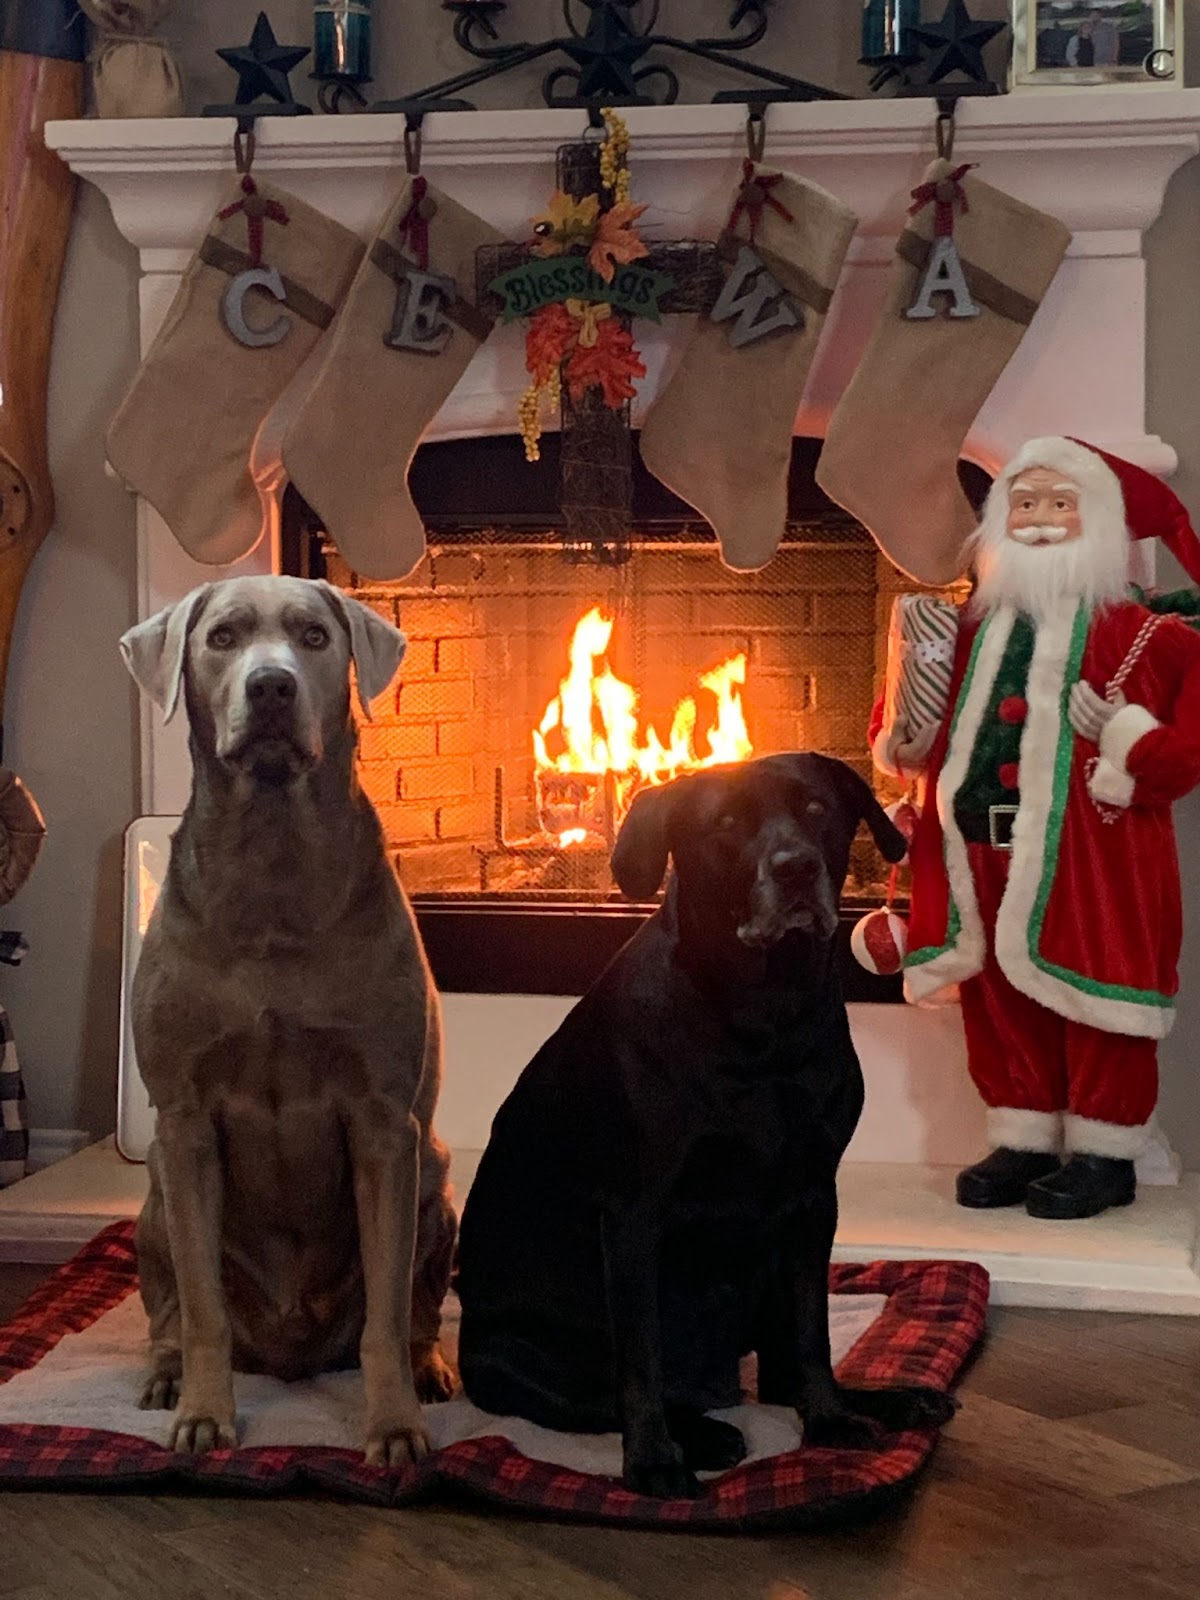 Two dogs sitting by a fireplace at Christmas